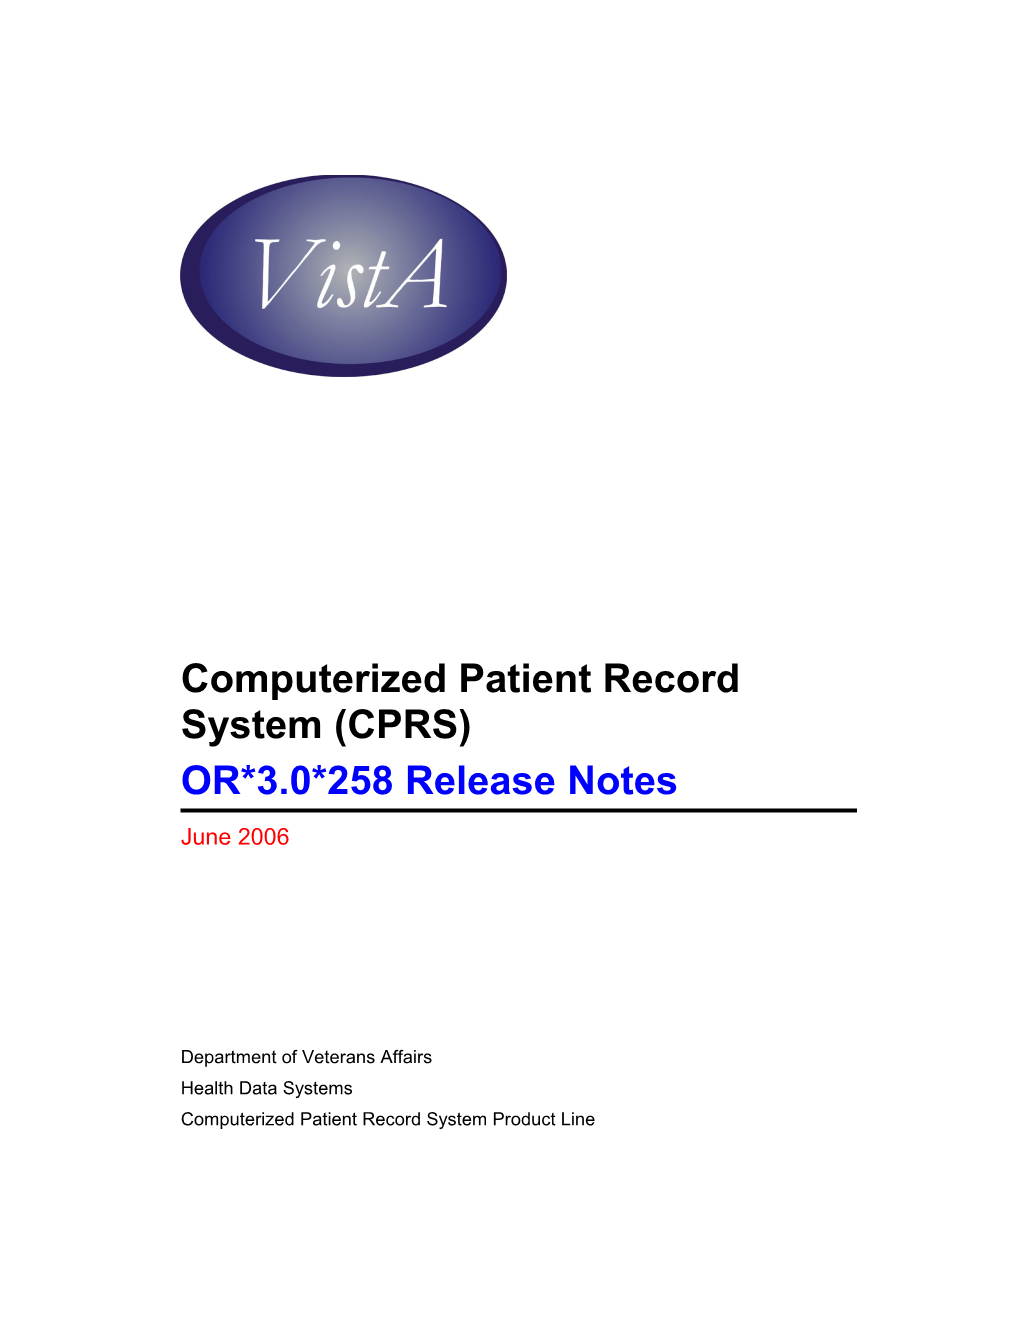 Computerized Patient Record System (CPRS)